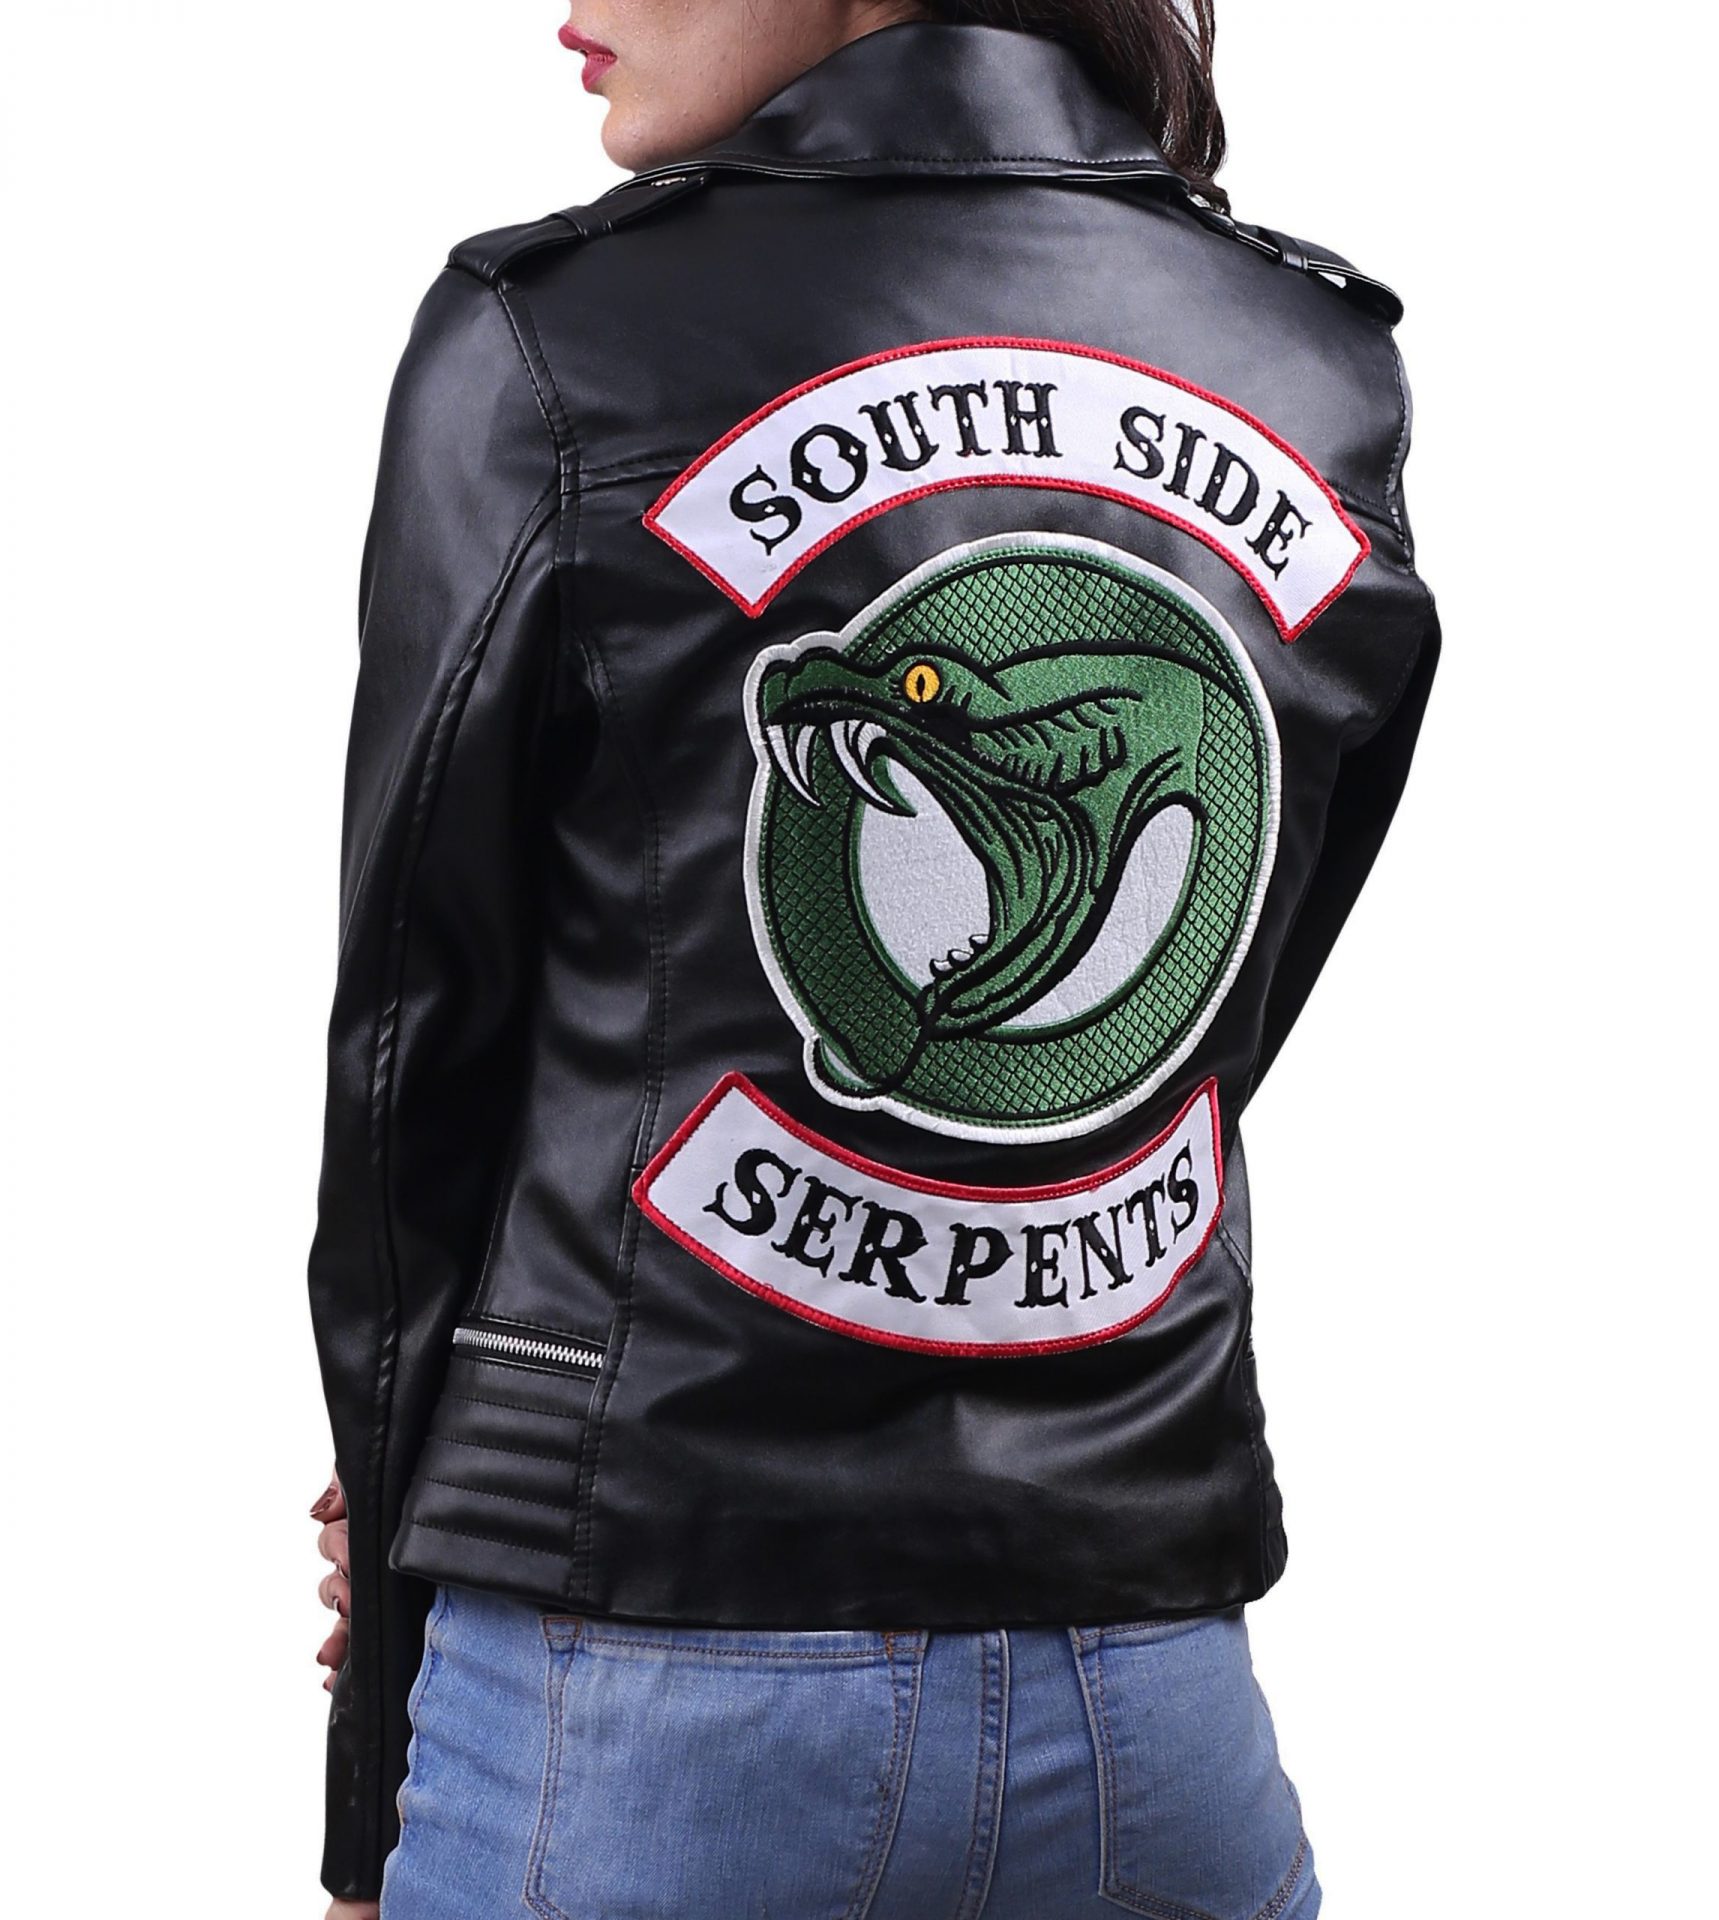 Southside Serpents Riverdale Leather Jacket Celebs Outfits